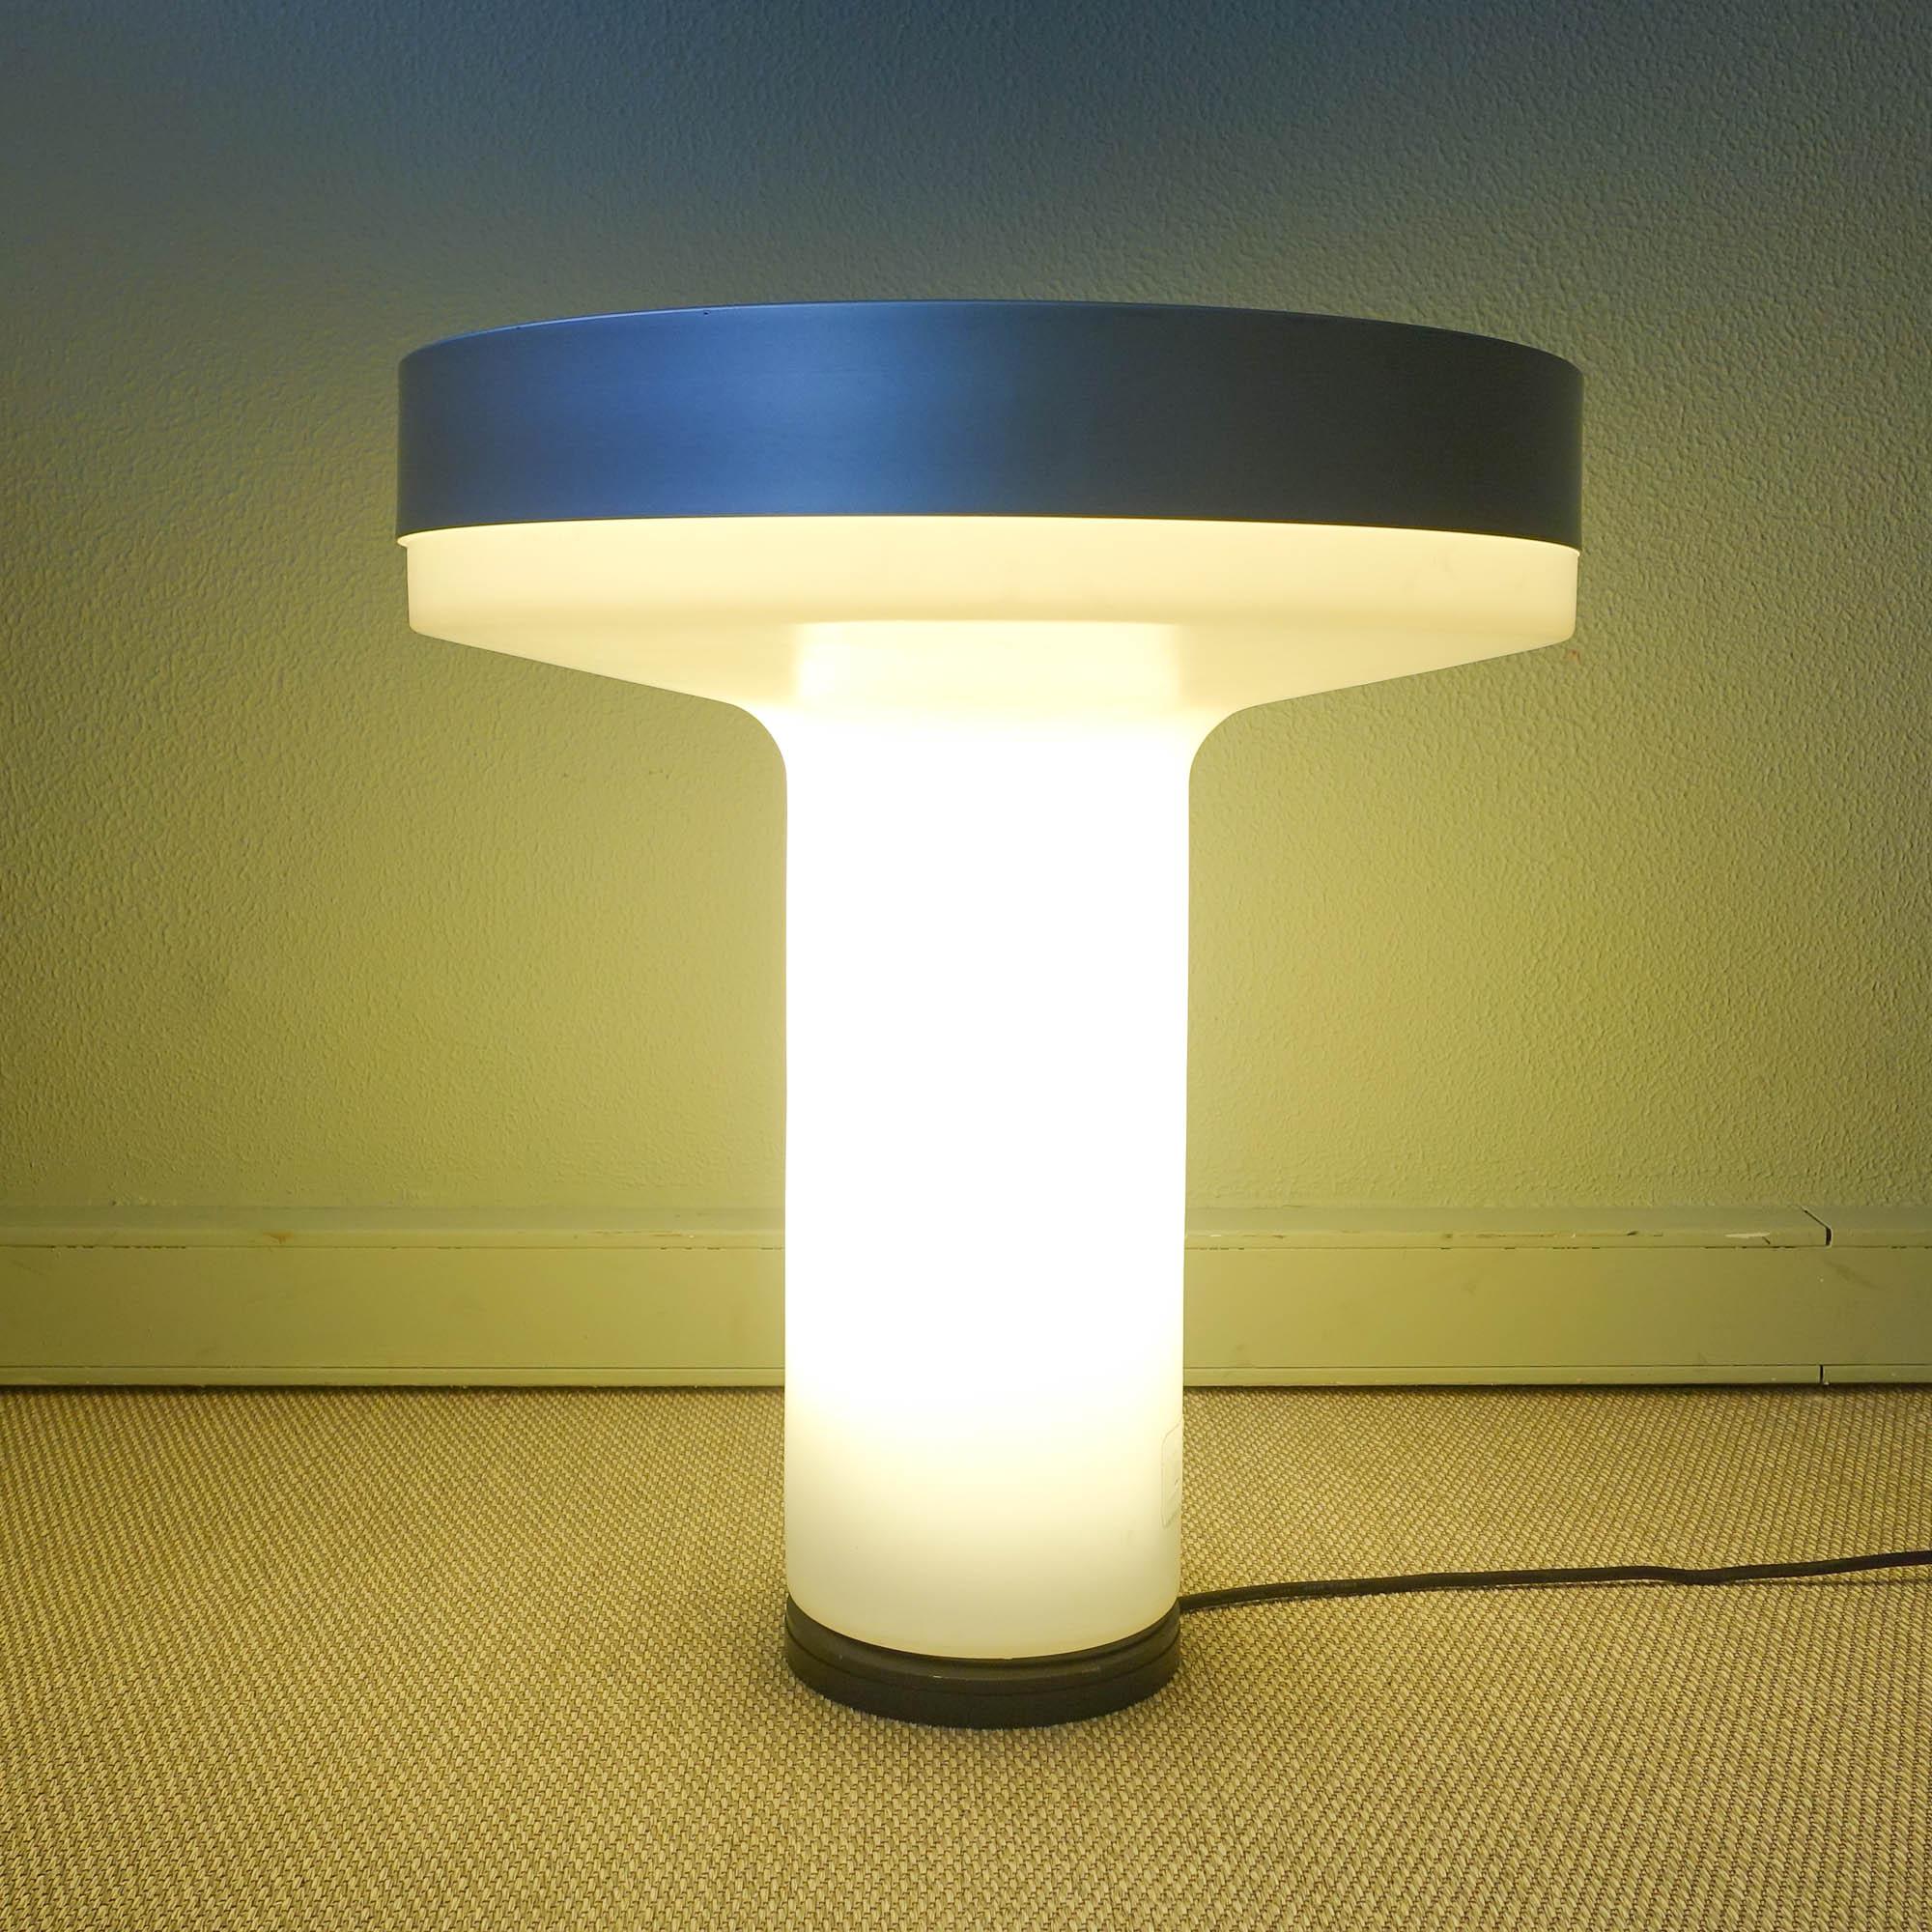 Spanish Boletus Outdoor Floor Lamp by Jorge Pensi for B.Lux, 2006 For Sale